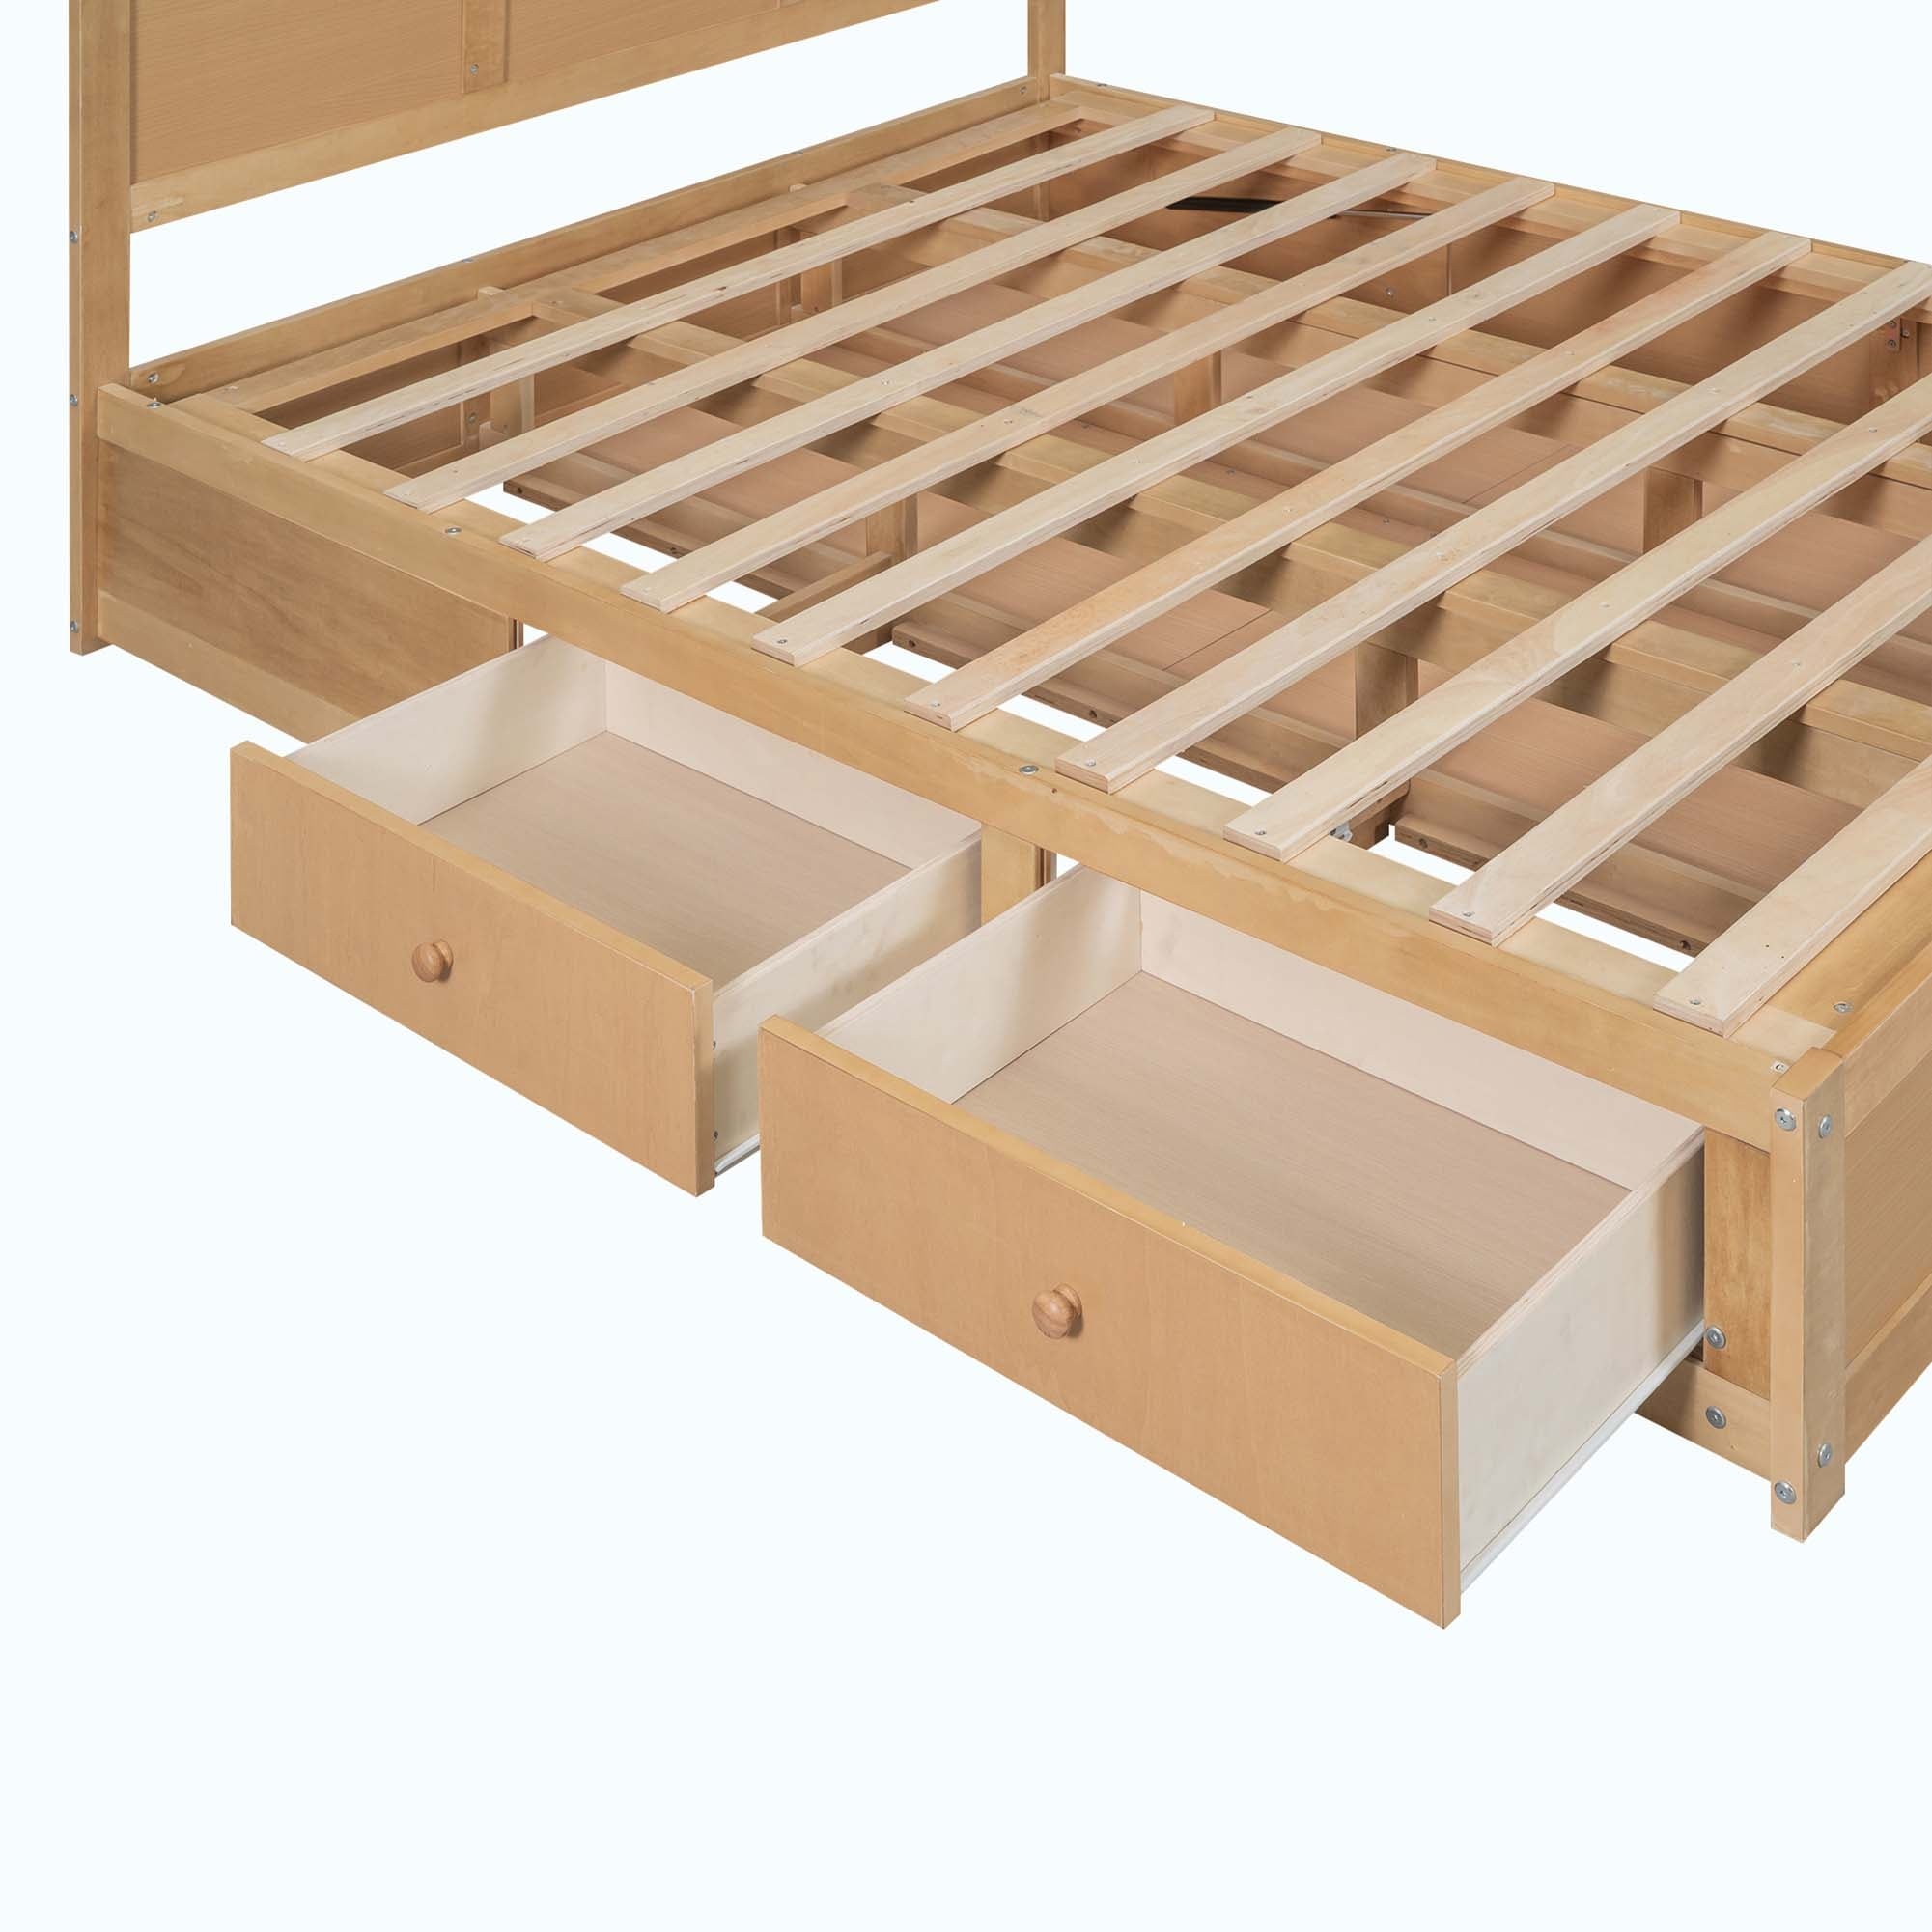 Wooden Boxes with Lids, 9 Compartment Storage Box (6.75 x 5.1 In, 2 Pack) -  Bed Bath & Beyond - 33068432